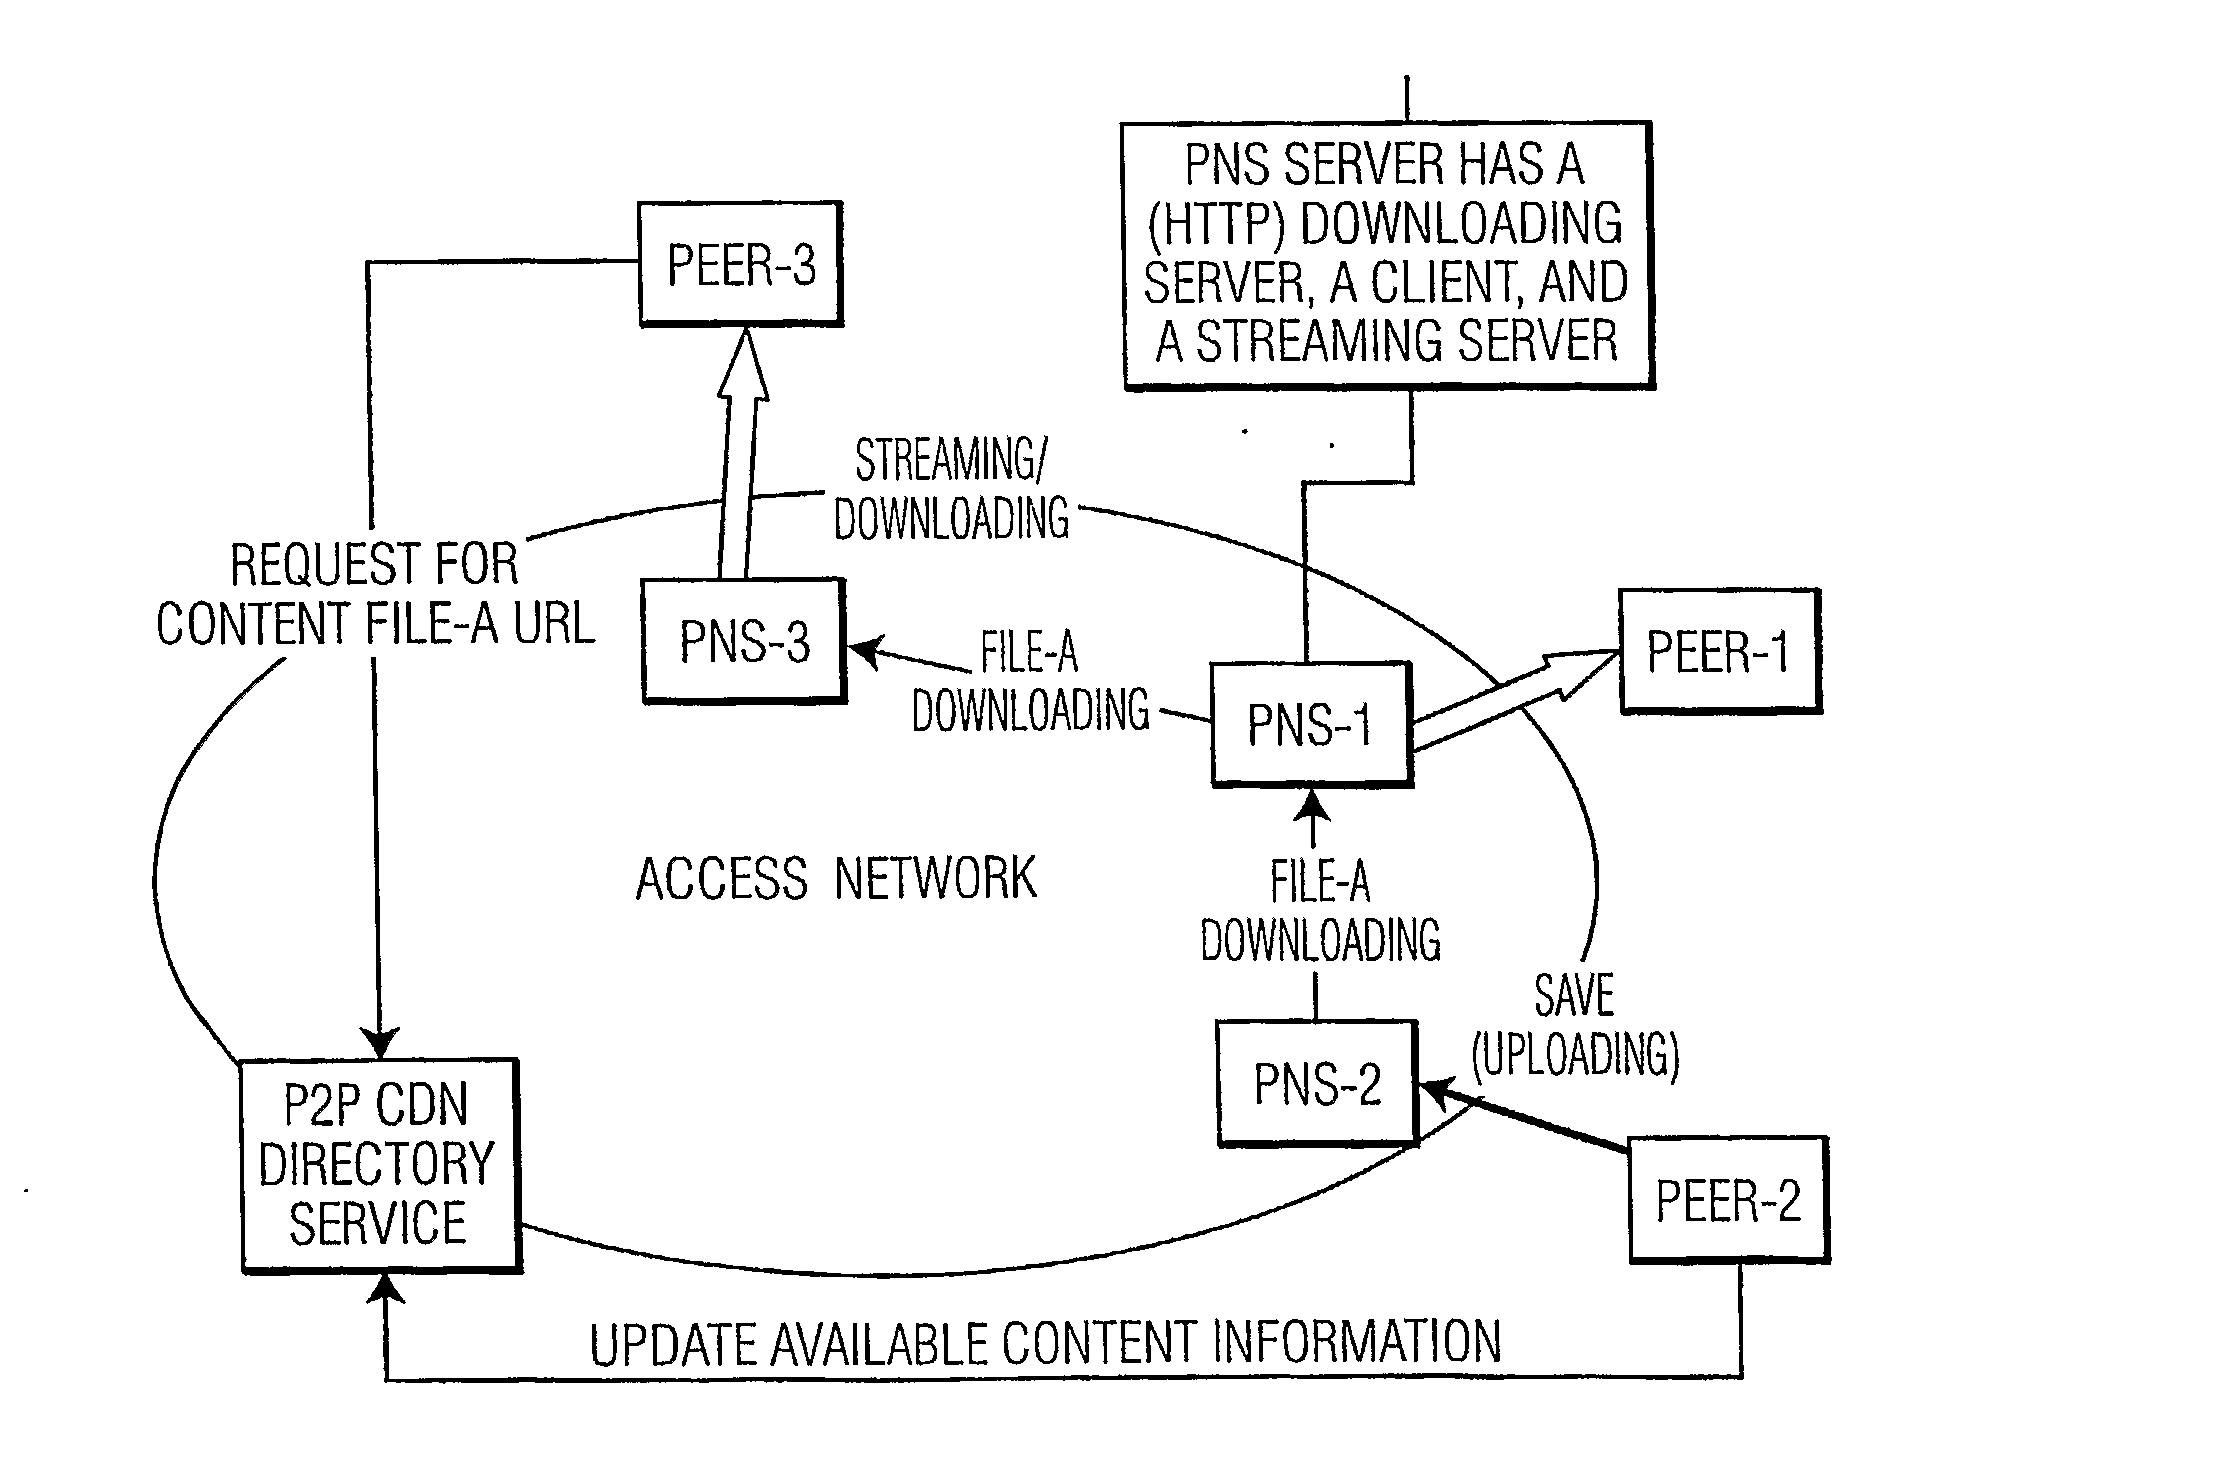 Peer-to-Peer Video Content Distribution Network Based on Personal Network Storage